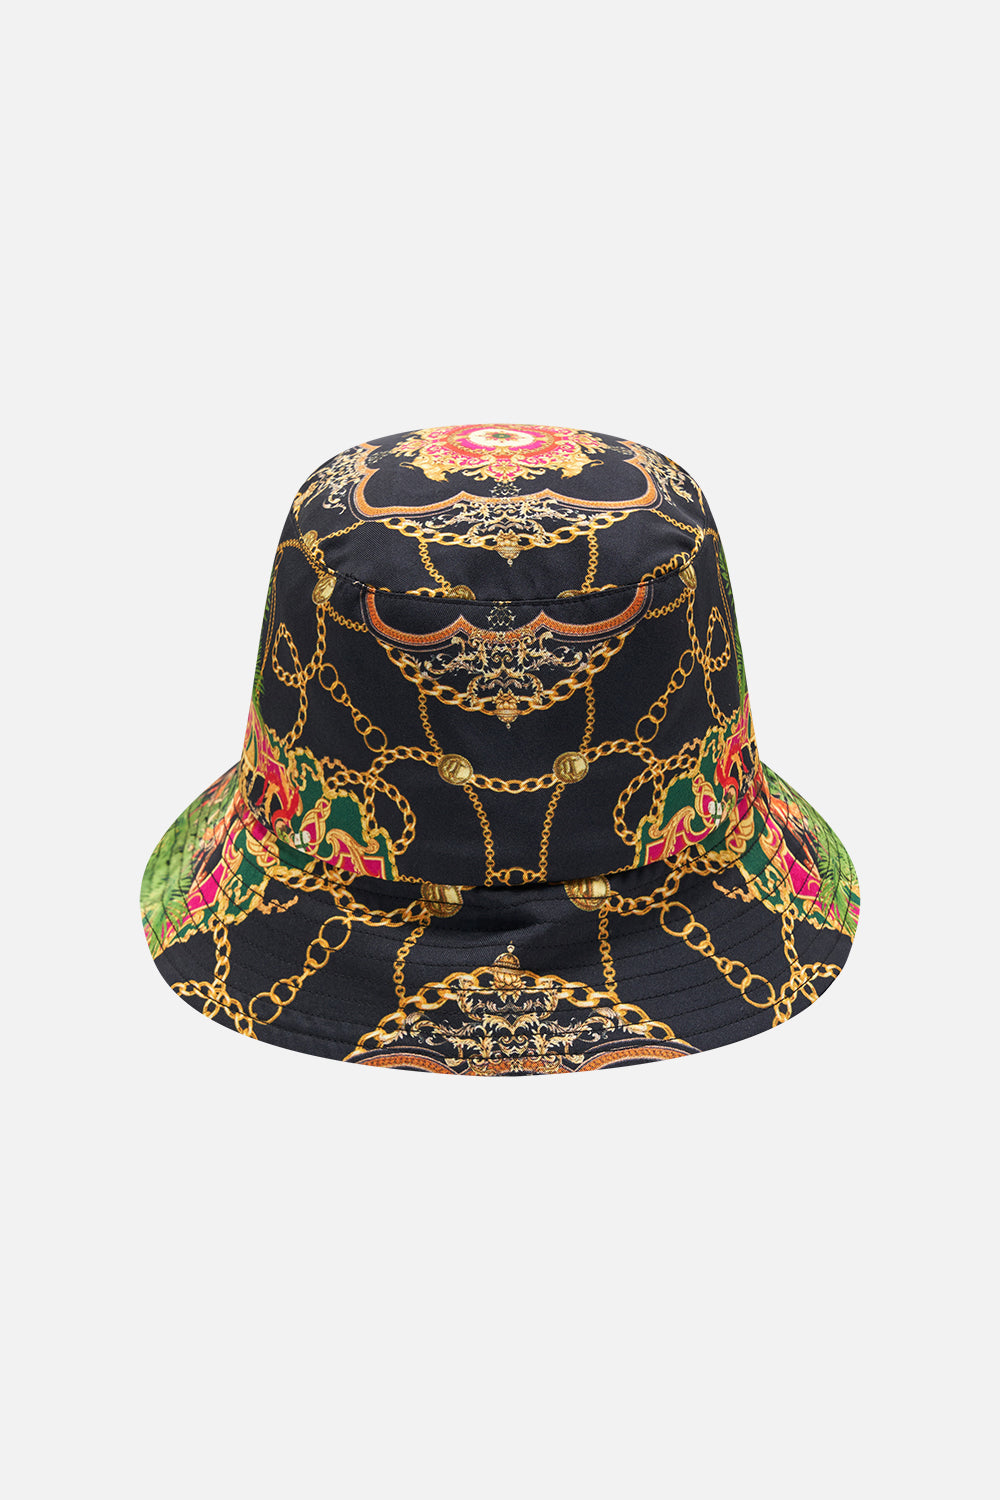 Detail view of CAMILLA bucket hat in Jealousy And Jewels print 